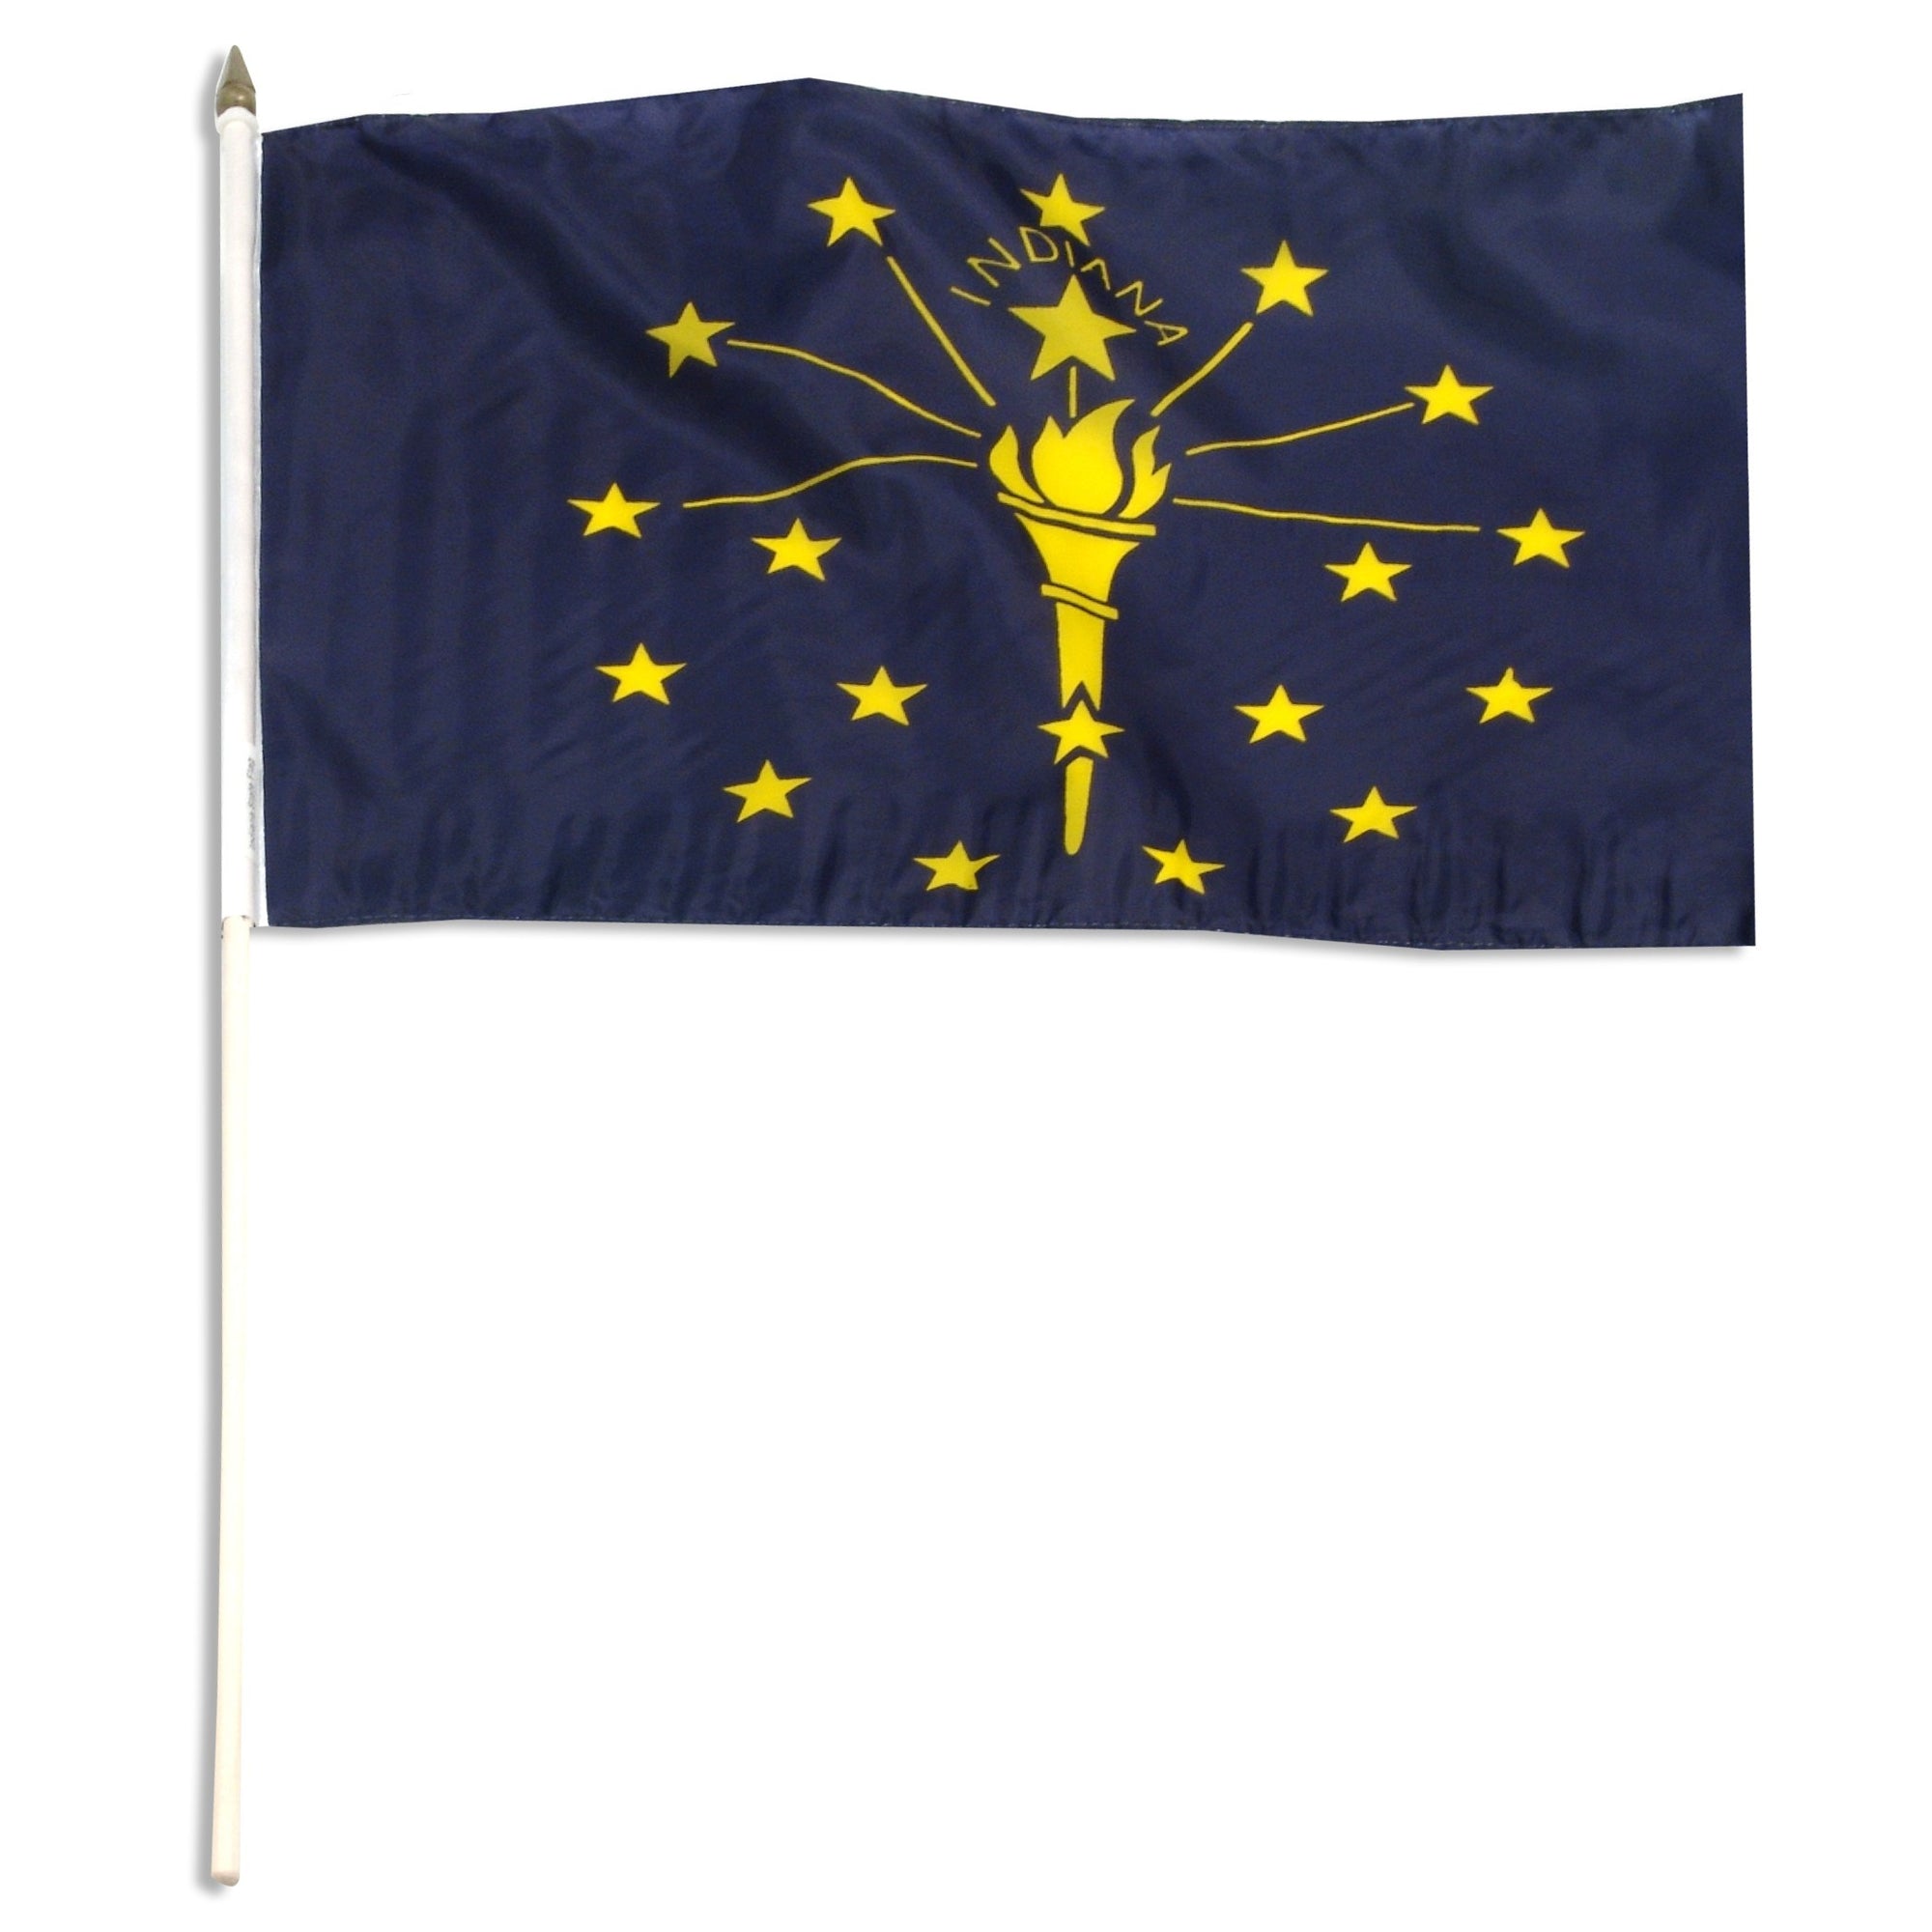 Indiana Flags For Sale by 1-800 Flags